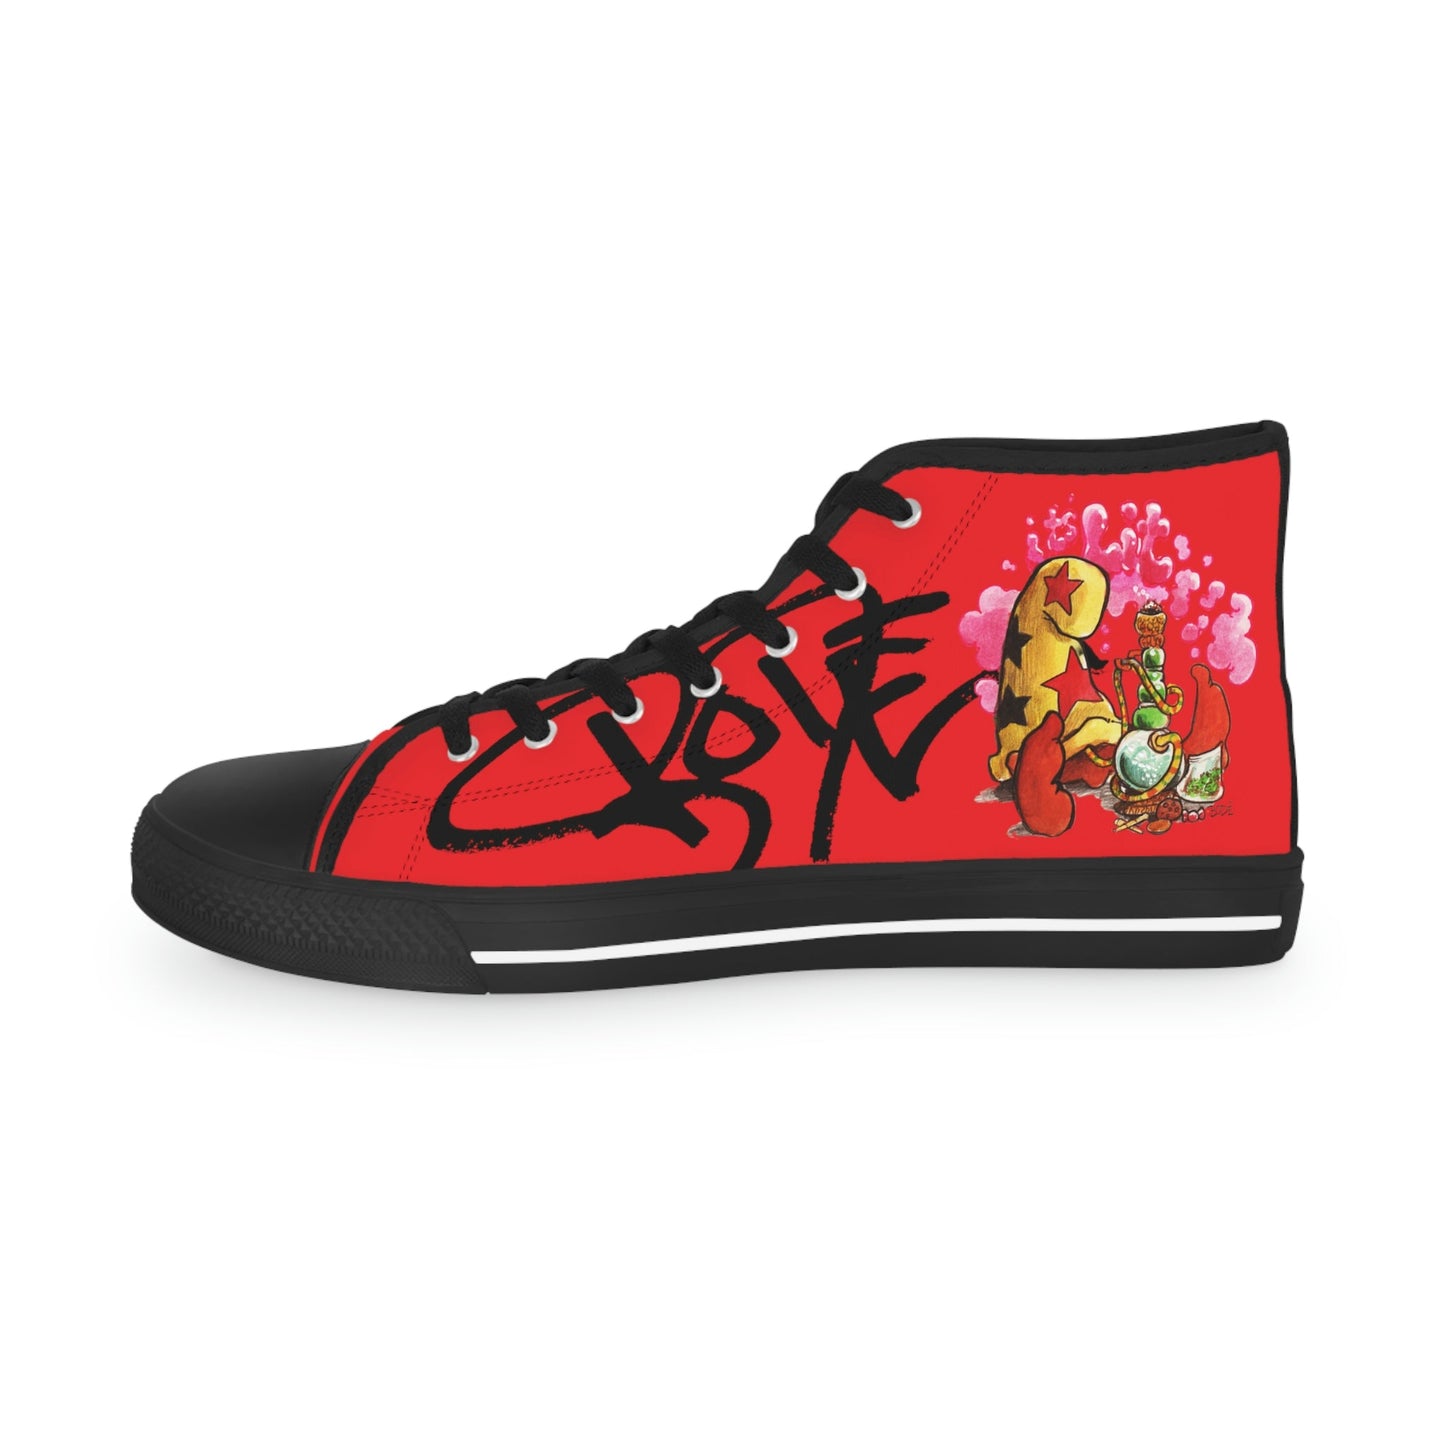 The "BODE CANVAS" Hi-Top Red #1